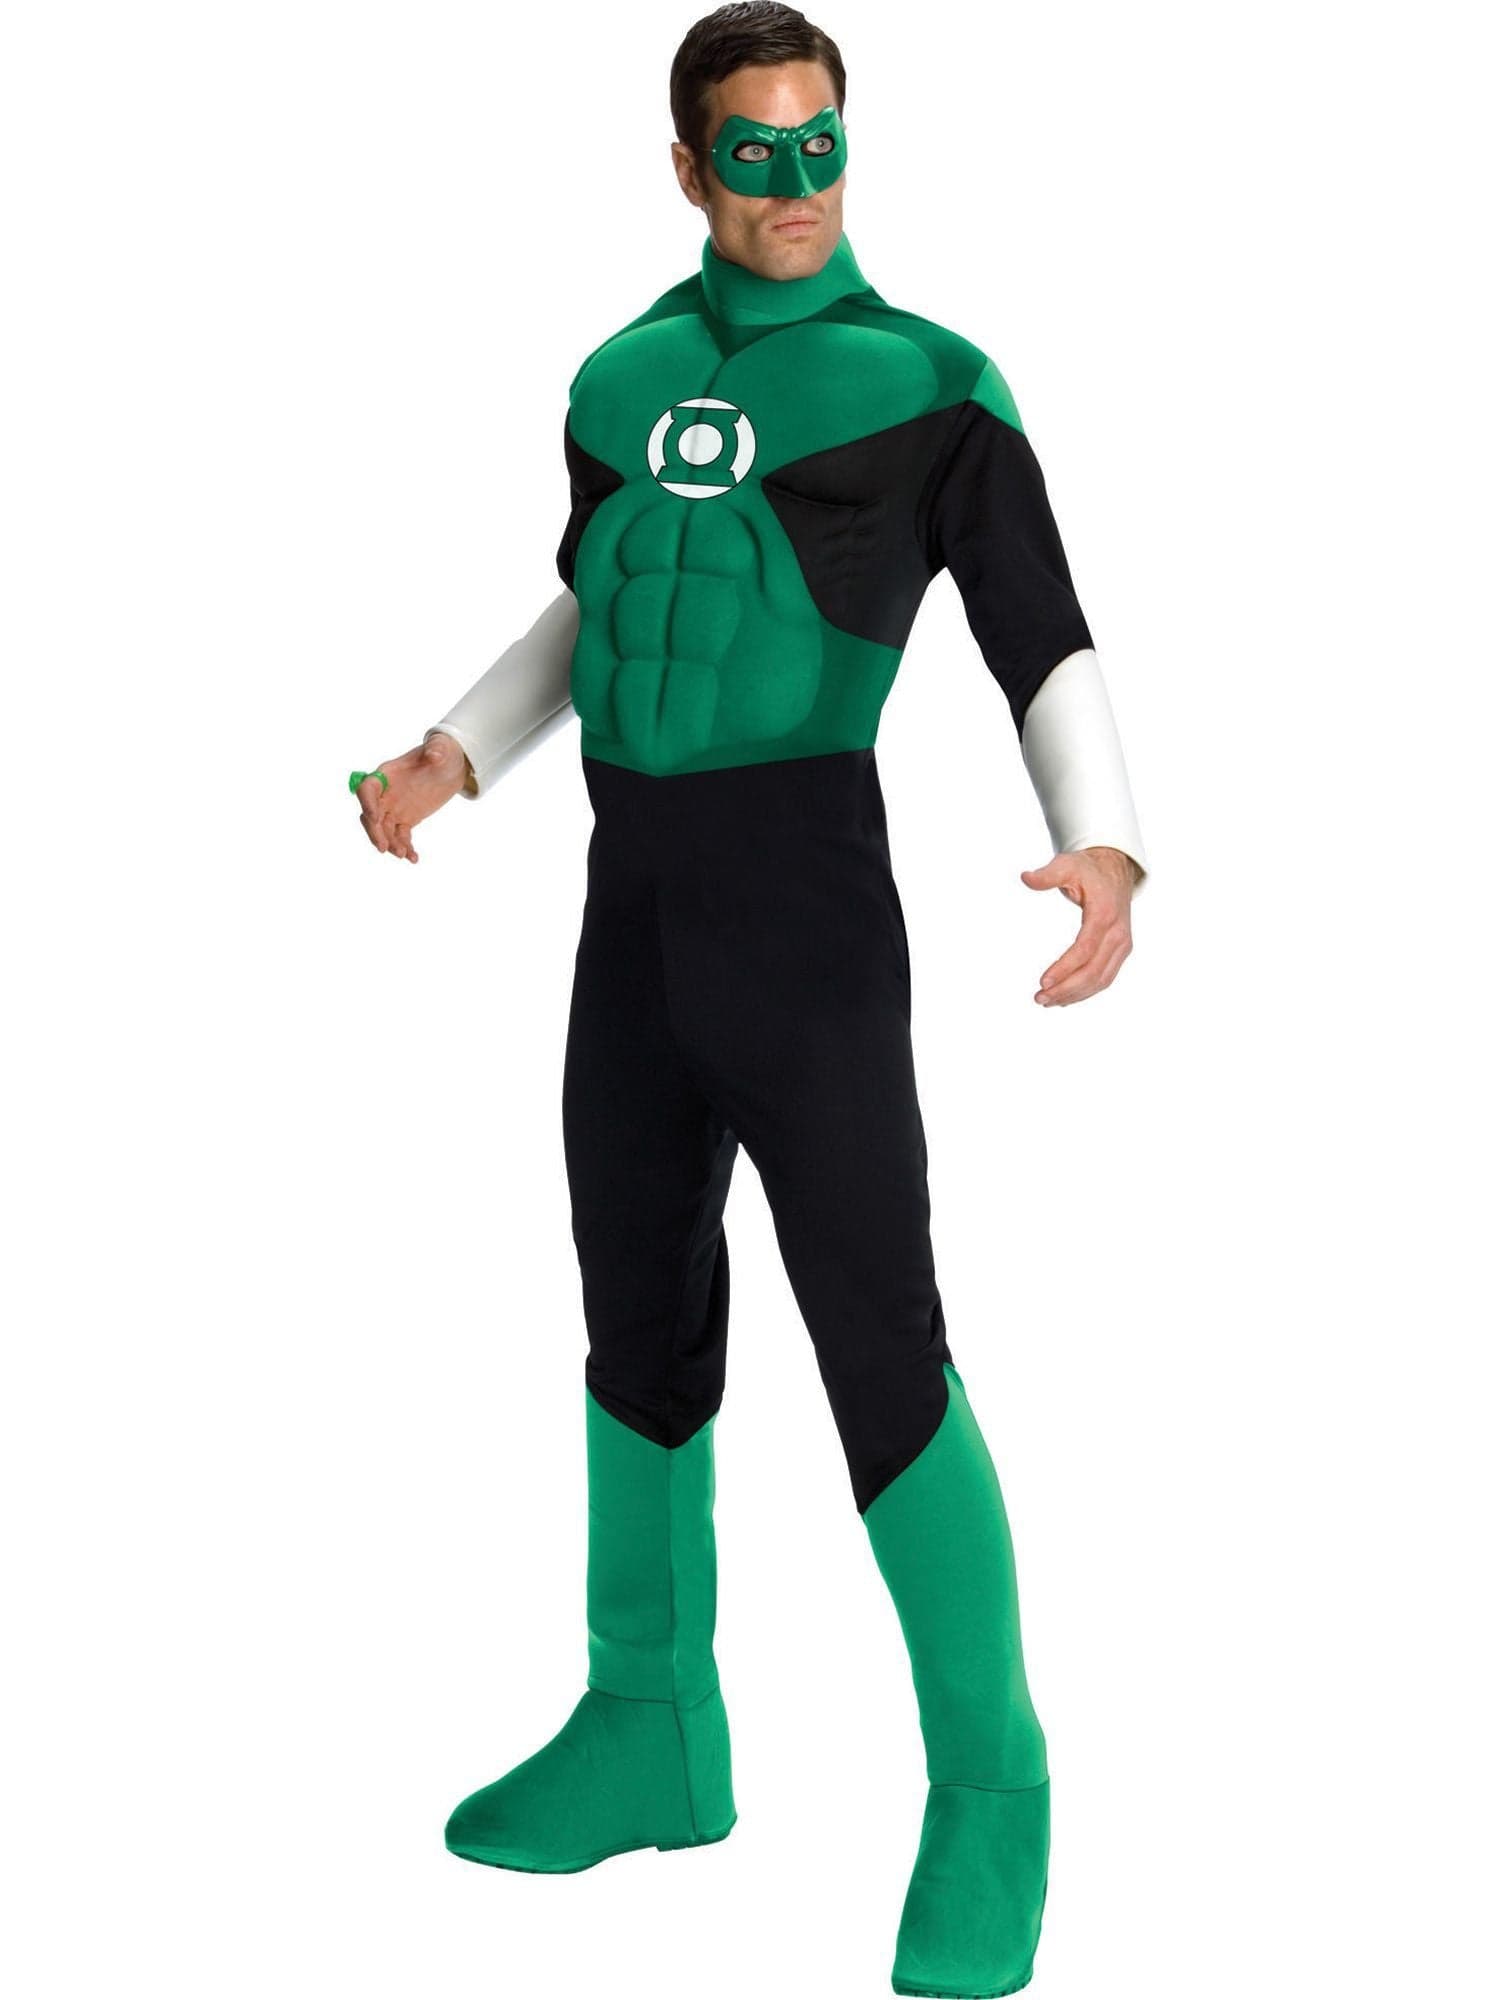 Adult Justice League Green Lantern Deluxe Muscle Chest Costume - costumes.com